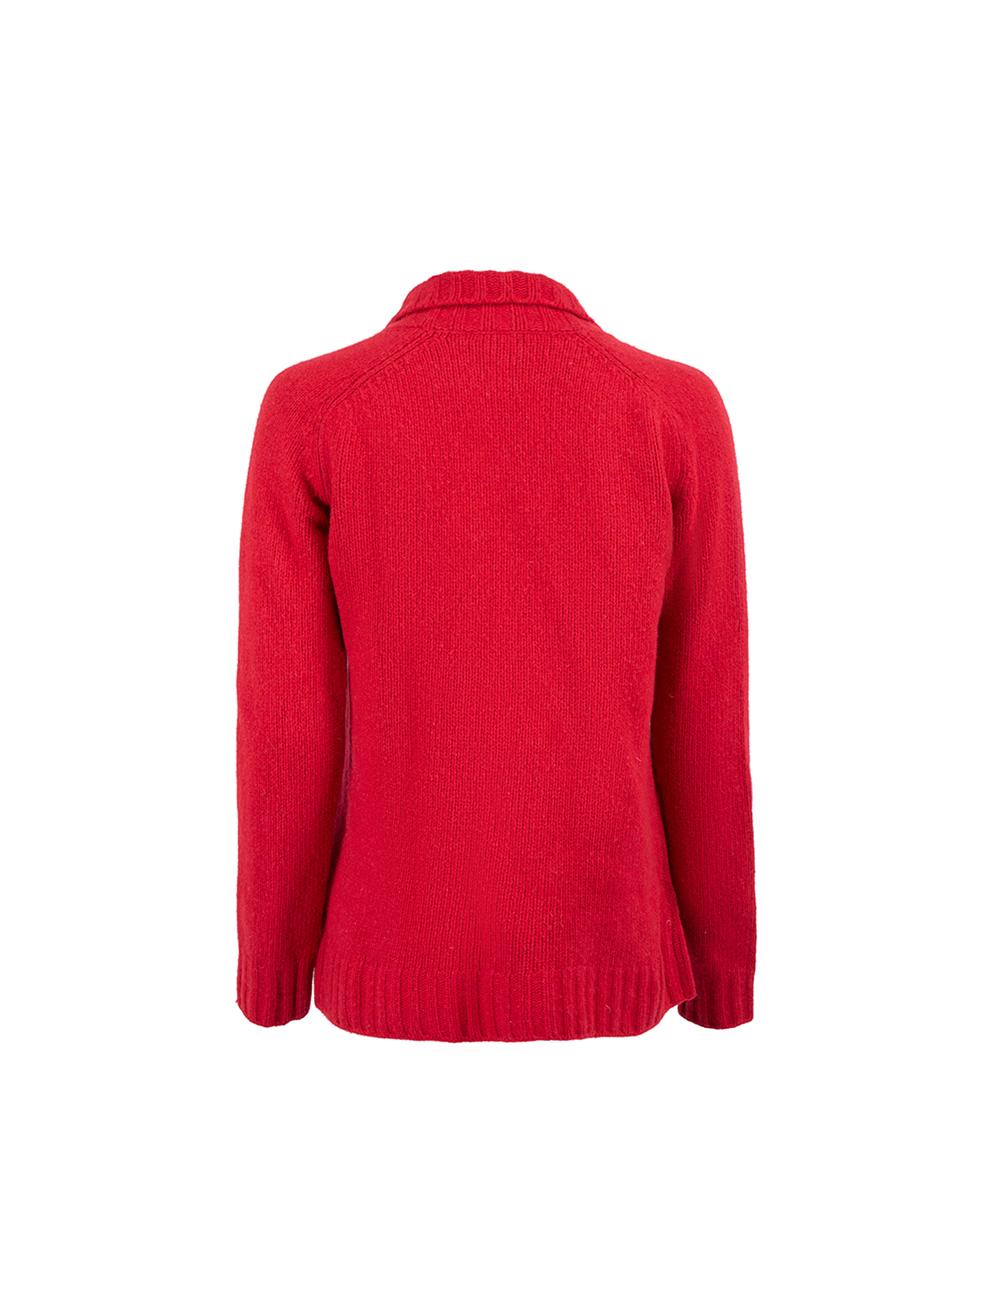 Balmain Red Wool Knit Buttoned Turtleneck Jumper Size XXL In Good Condition For Sale In London, GB